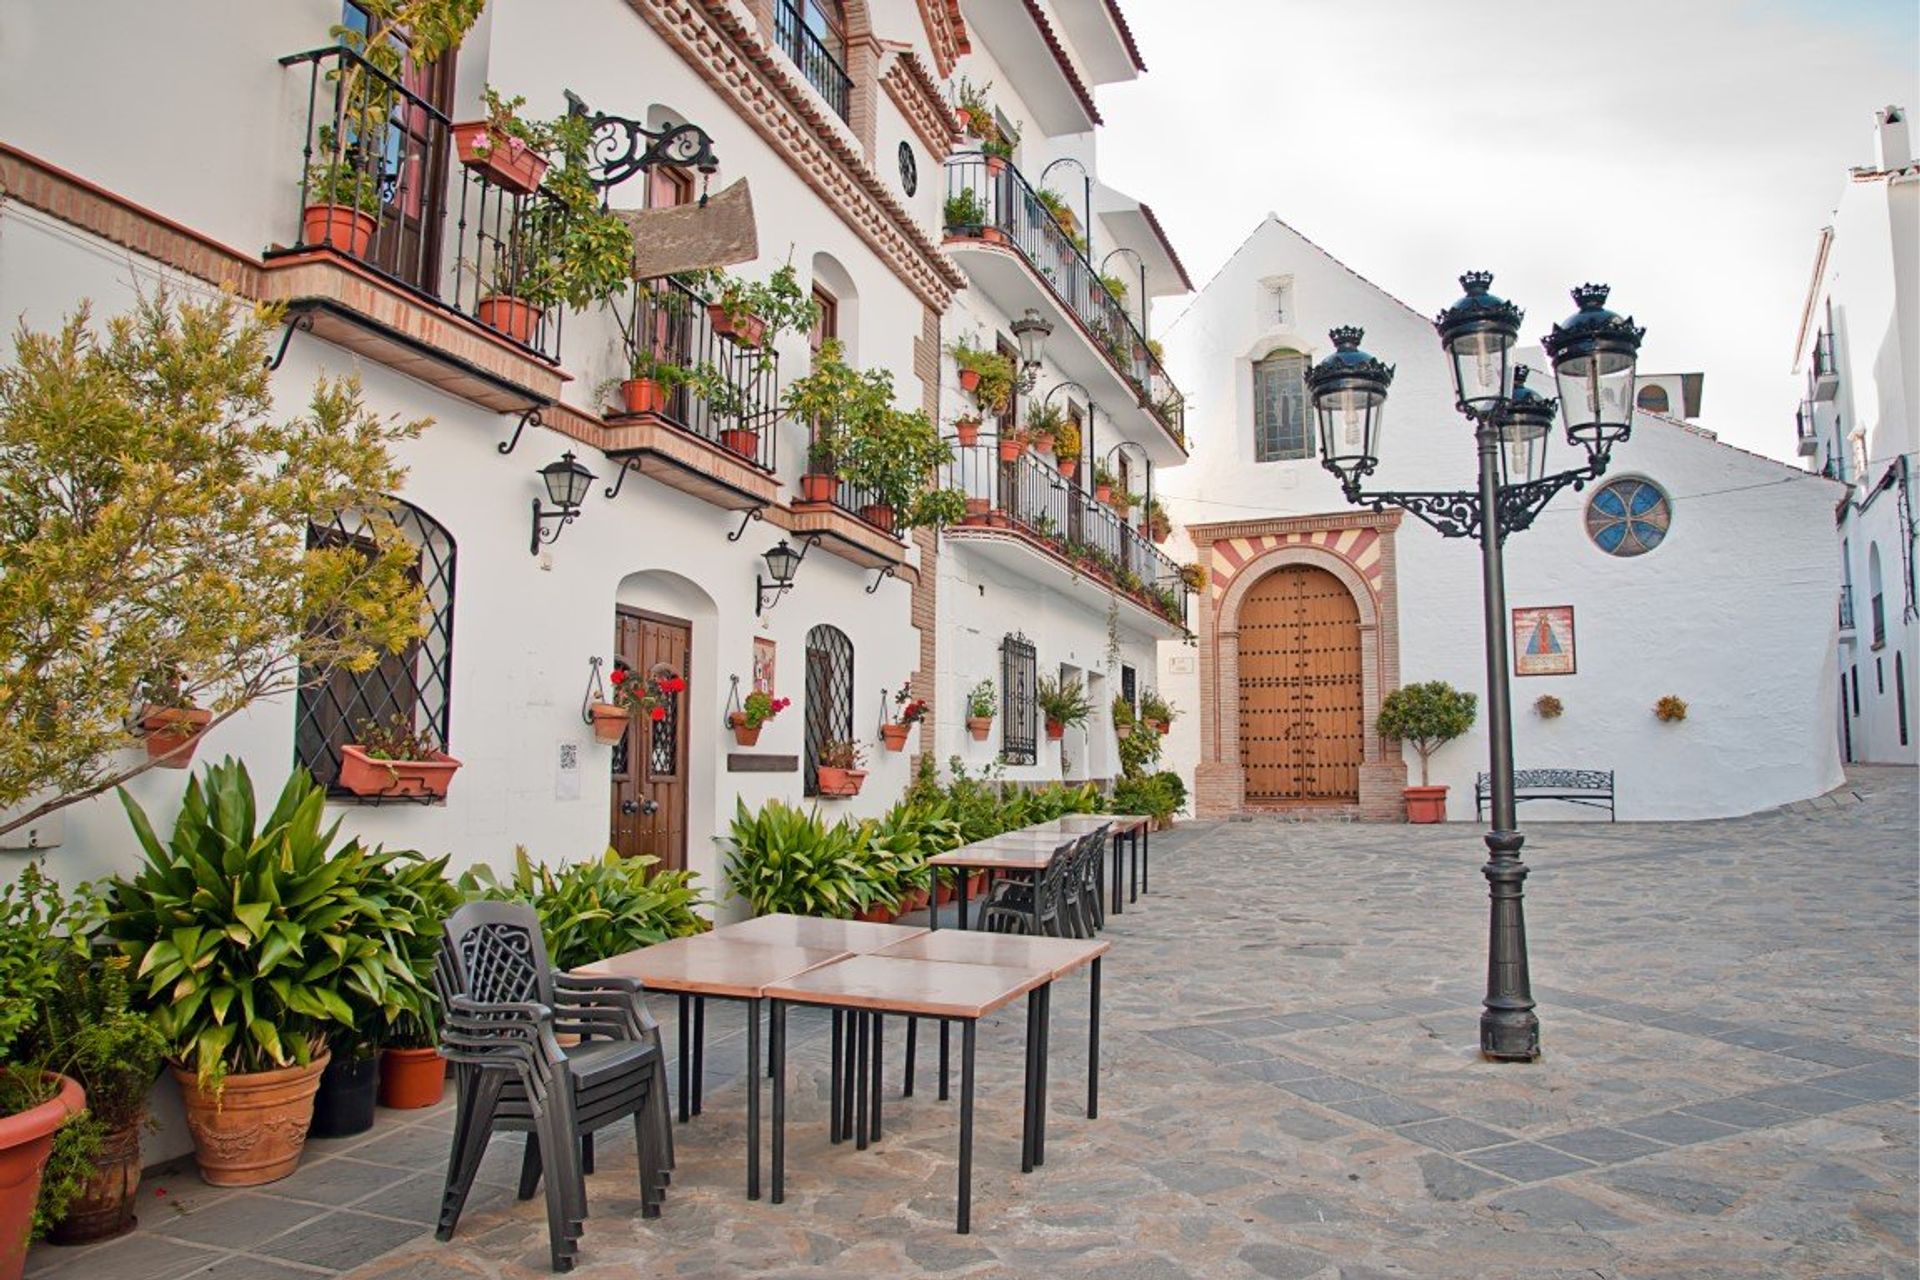 The picturesque town of Canillas de albaida is part of the Route of Sun and Wine, less than 10 minutes from Cometa